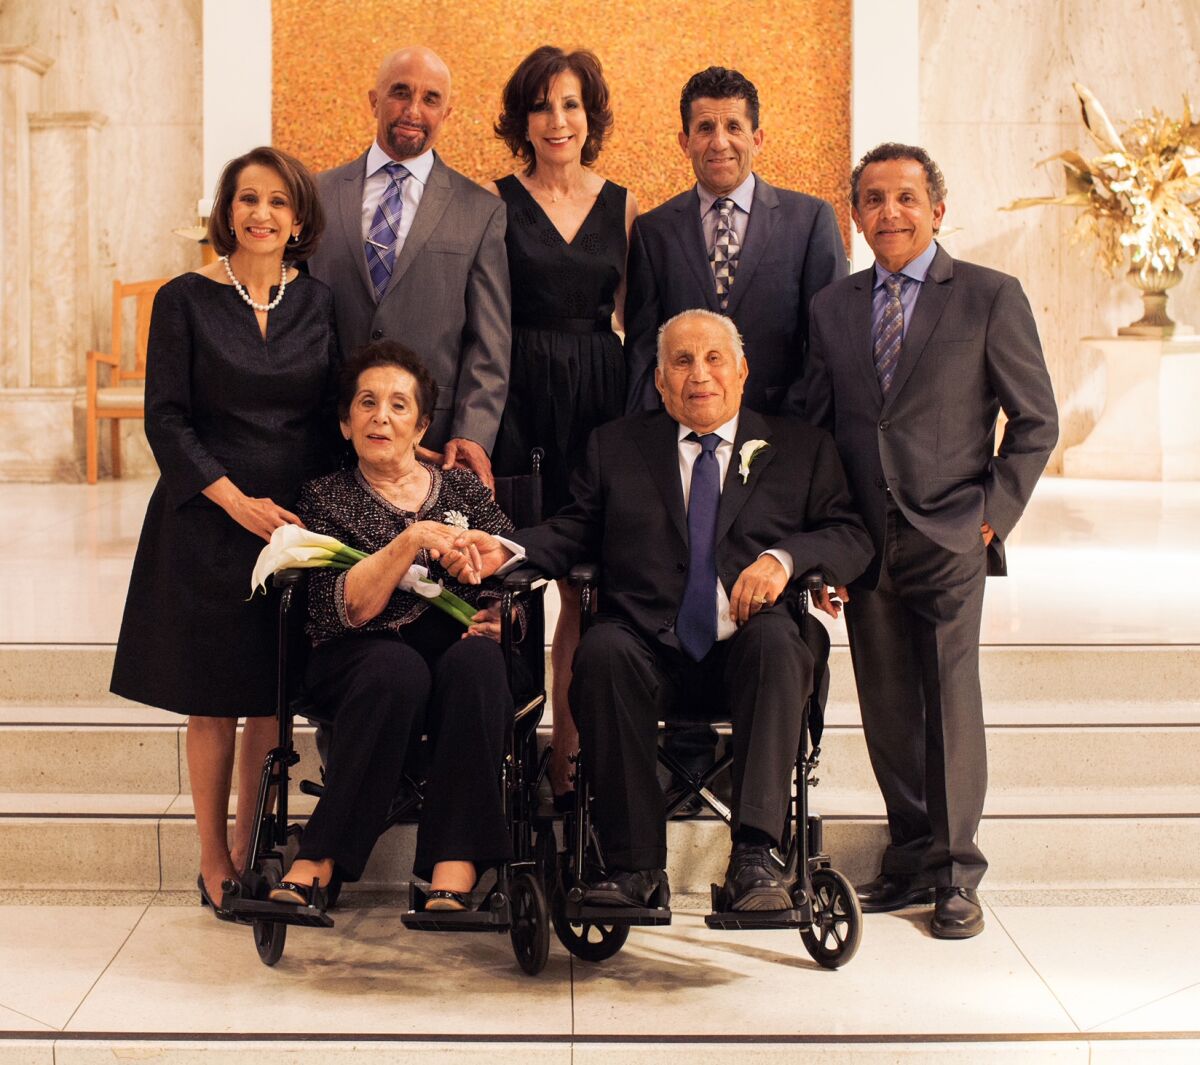 The Avilas and their family celebrate their 70th wedding anniversary. Salvador Avila died on July 28 at 99.